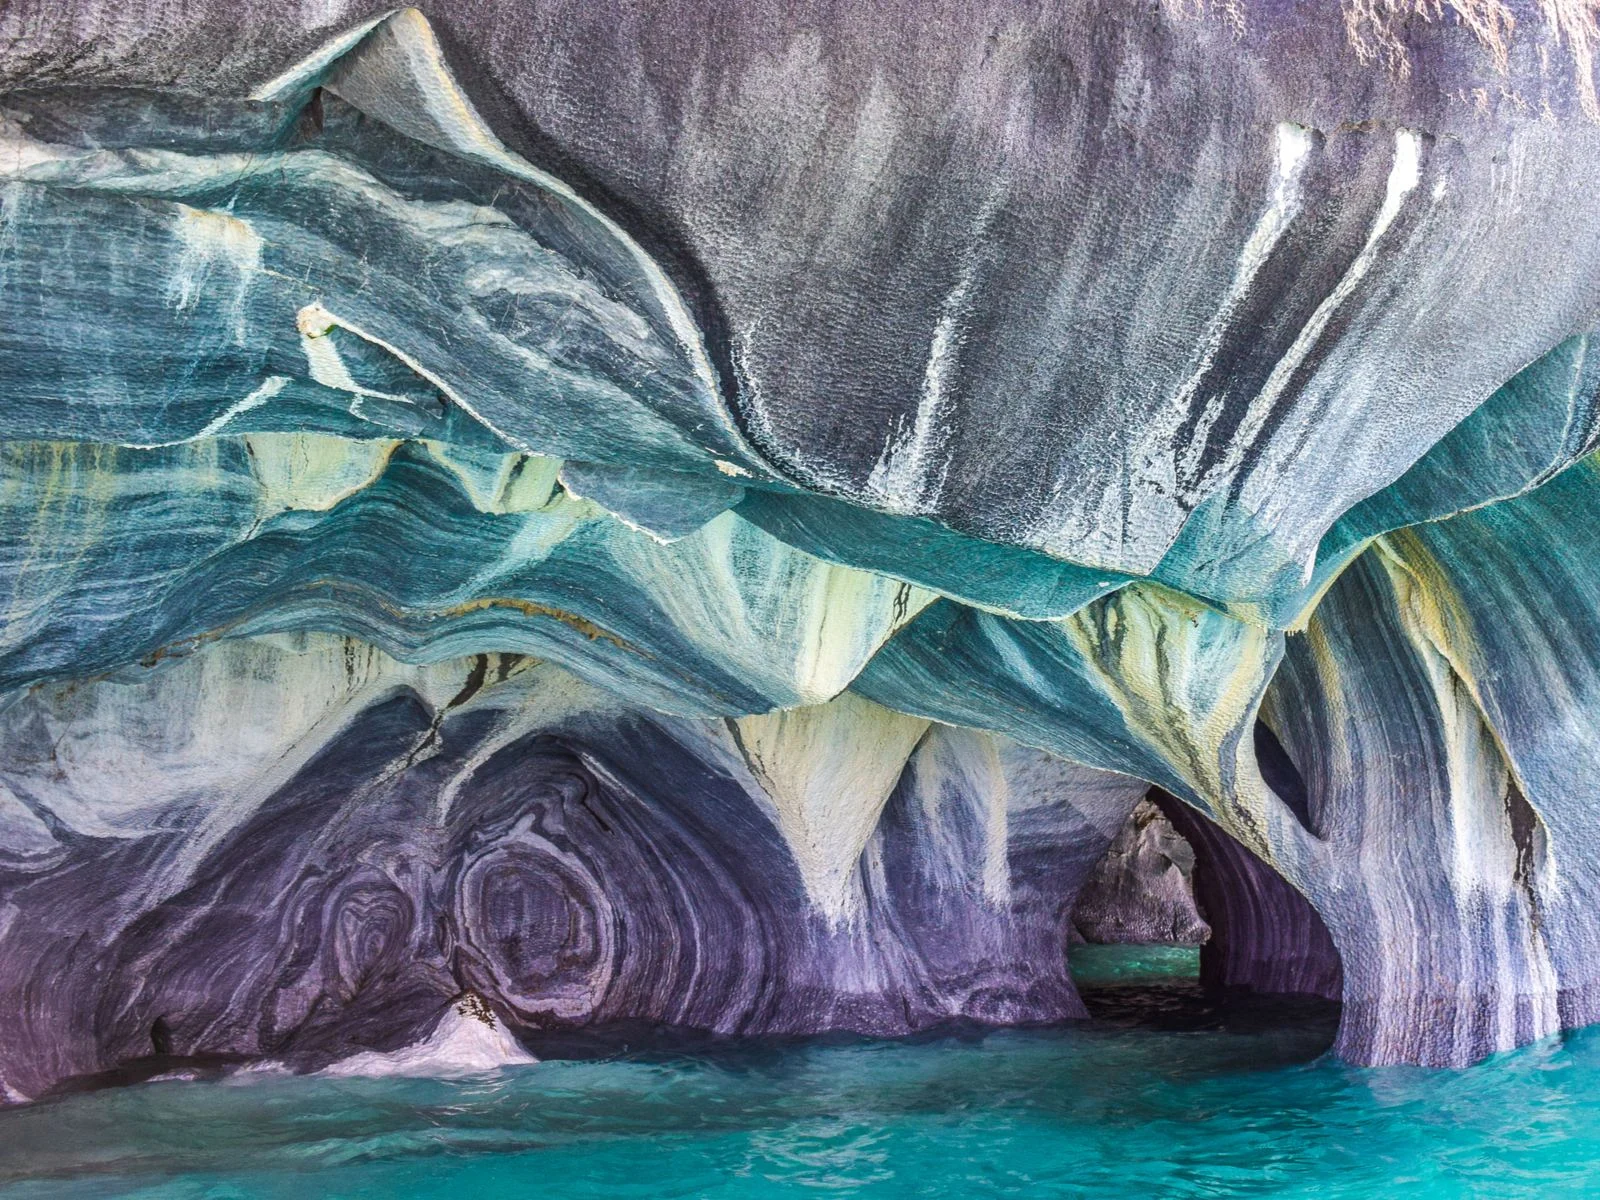 To highlight the best time to visit Chile, The blue colors of the marble caves in patagonia